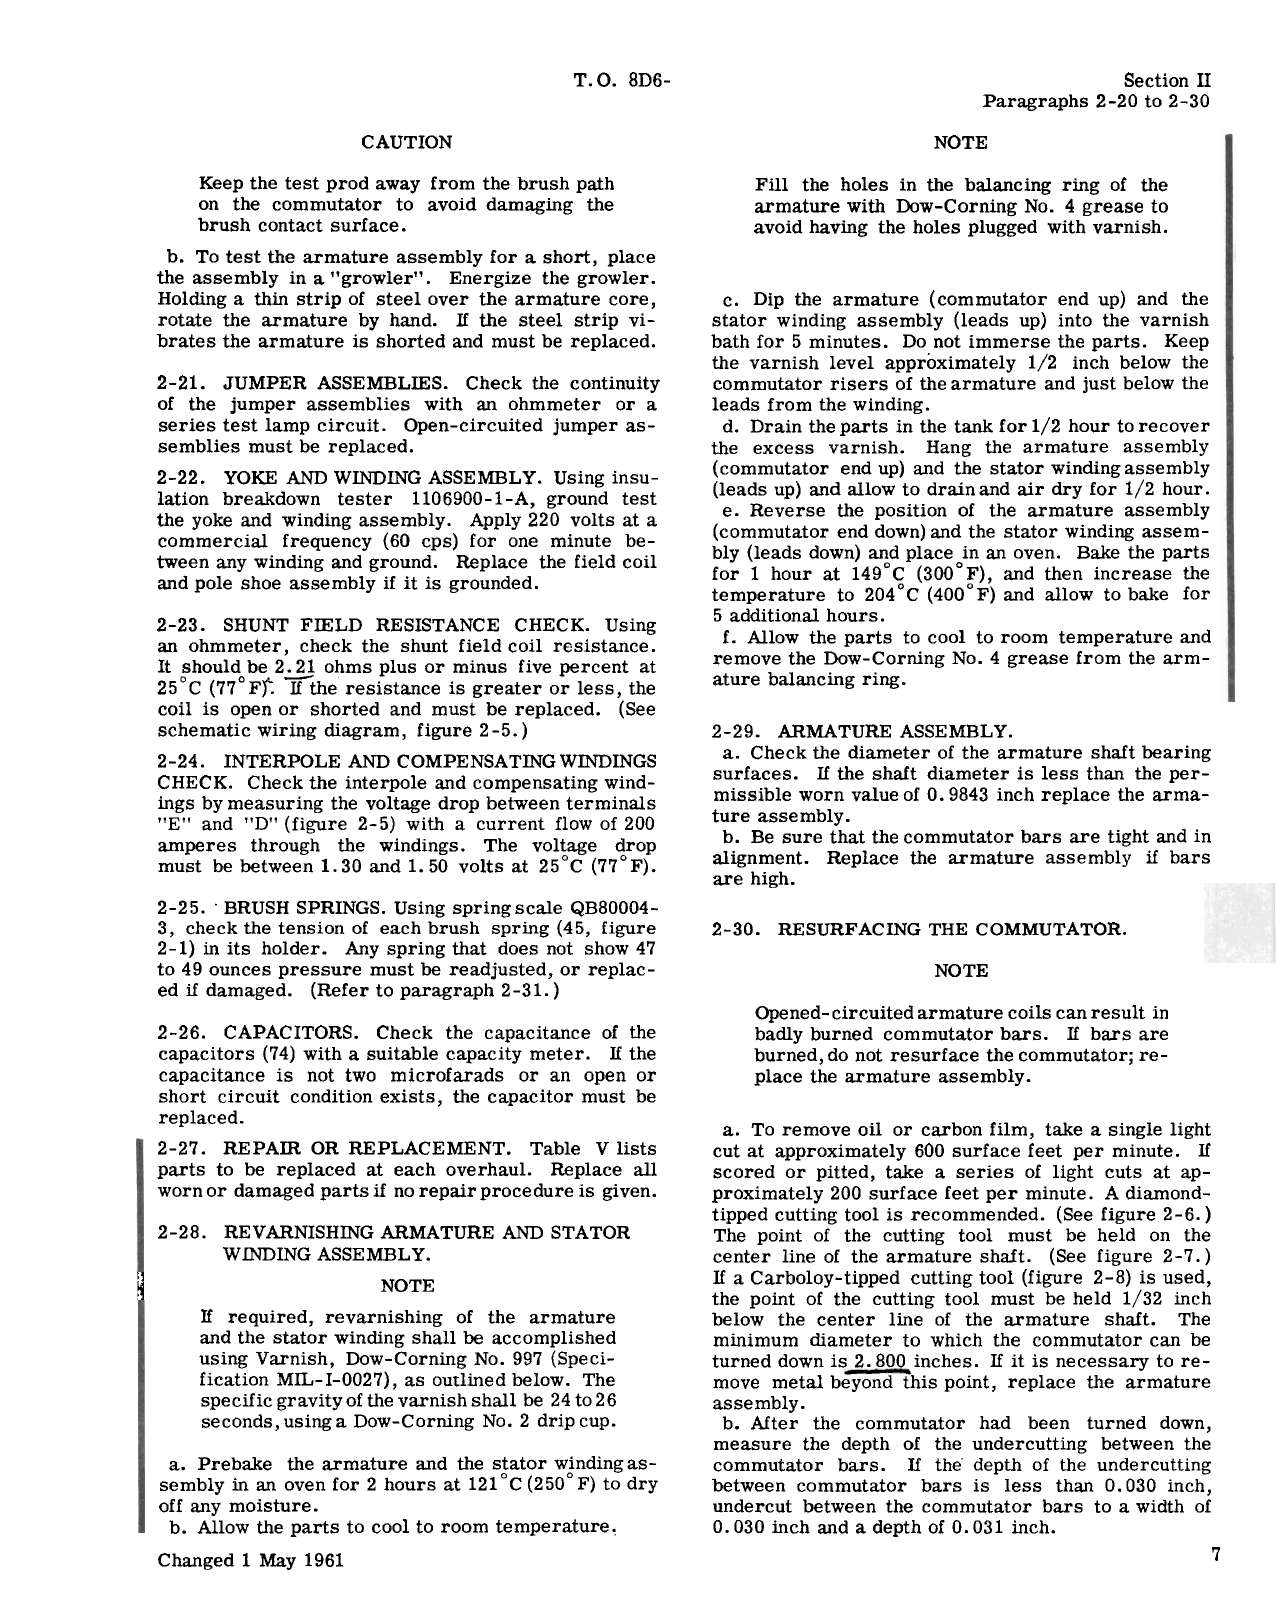 Sample page 5 from AirCorps Library document: Overhaul for Direct Current Generator - Types 30E20-1-A, 30E20-5-A, 30E20-5-B, 30E20-19-A, and 30E20-33-B 